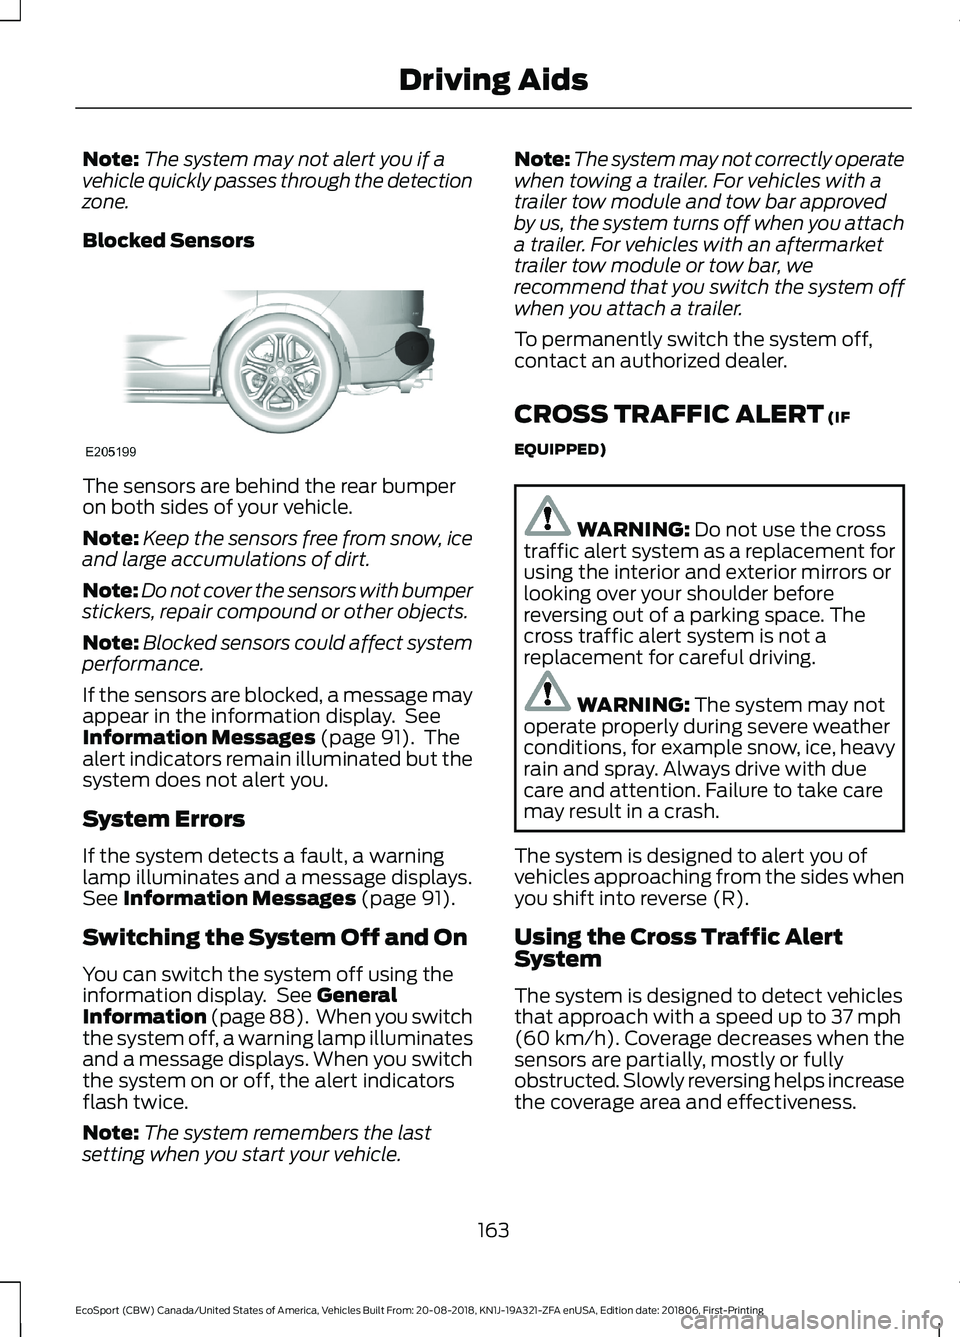 FORD ECOSPORT 2019  Owners Manual Note:The system may not alert you if avehicle quickly passes through the detectionzone.
Blocked Sensors
The sensors are behind the rear bumperon both sides of your vehicle.
Note:Keep the sensors free 